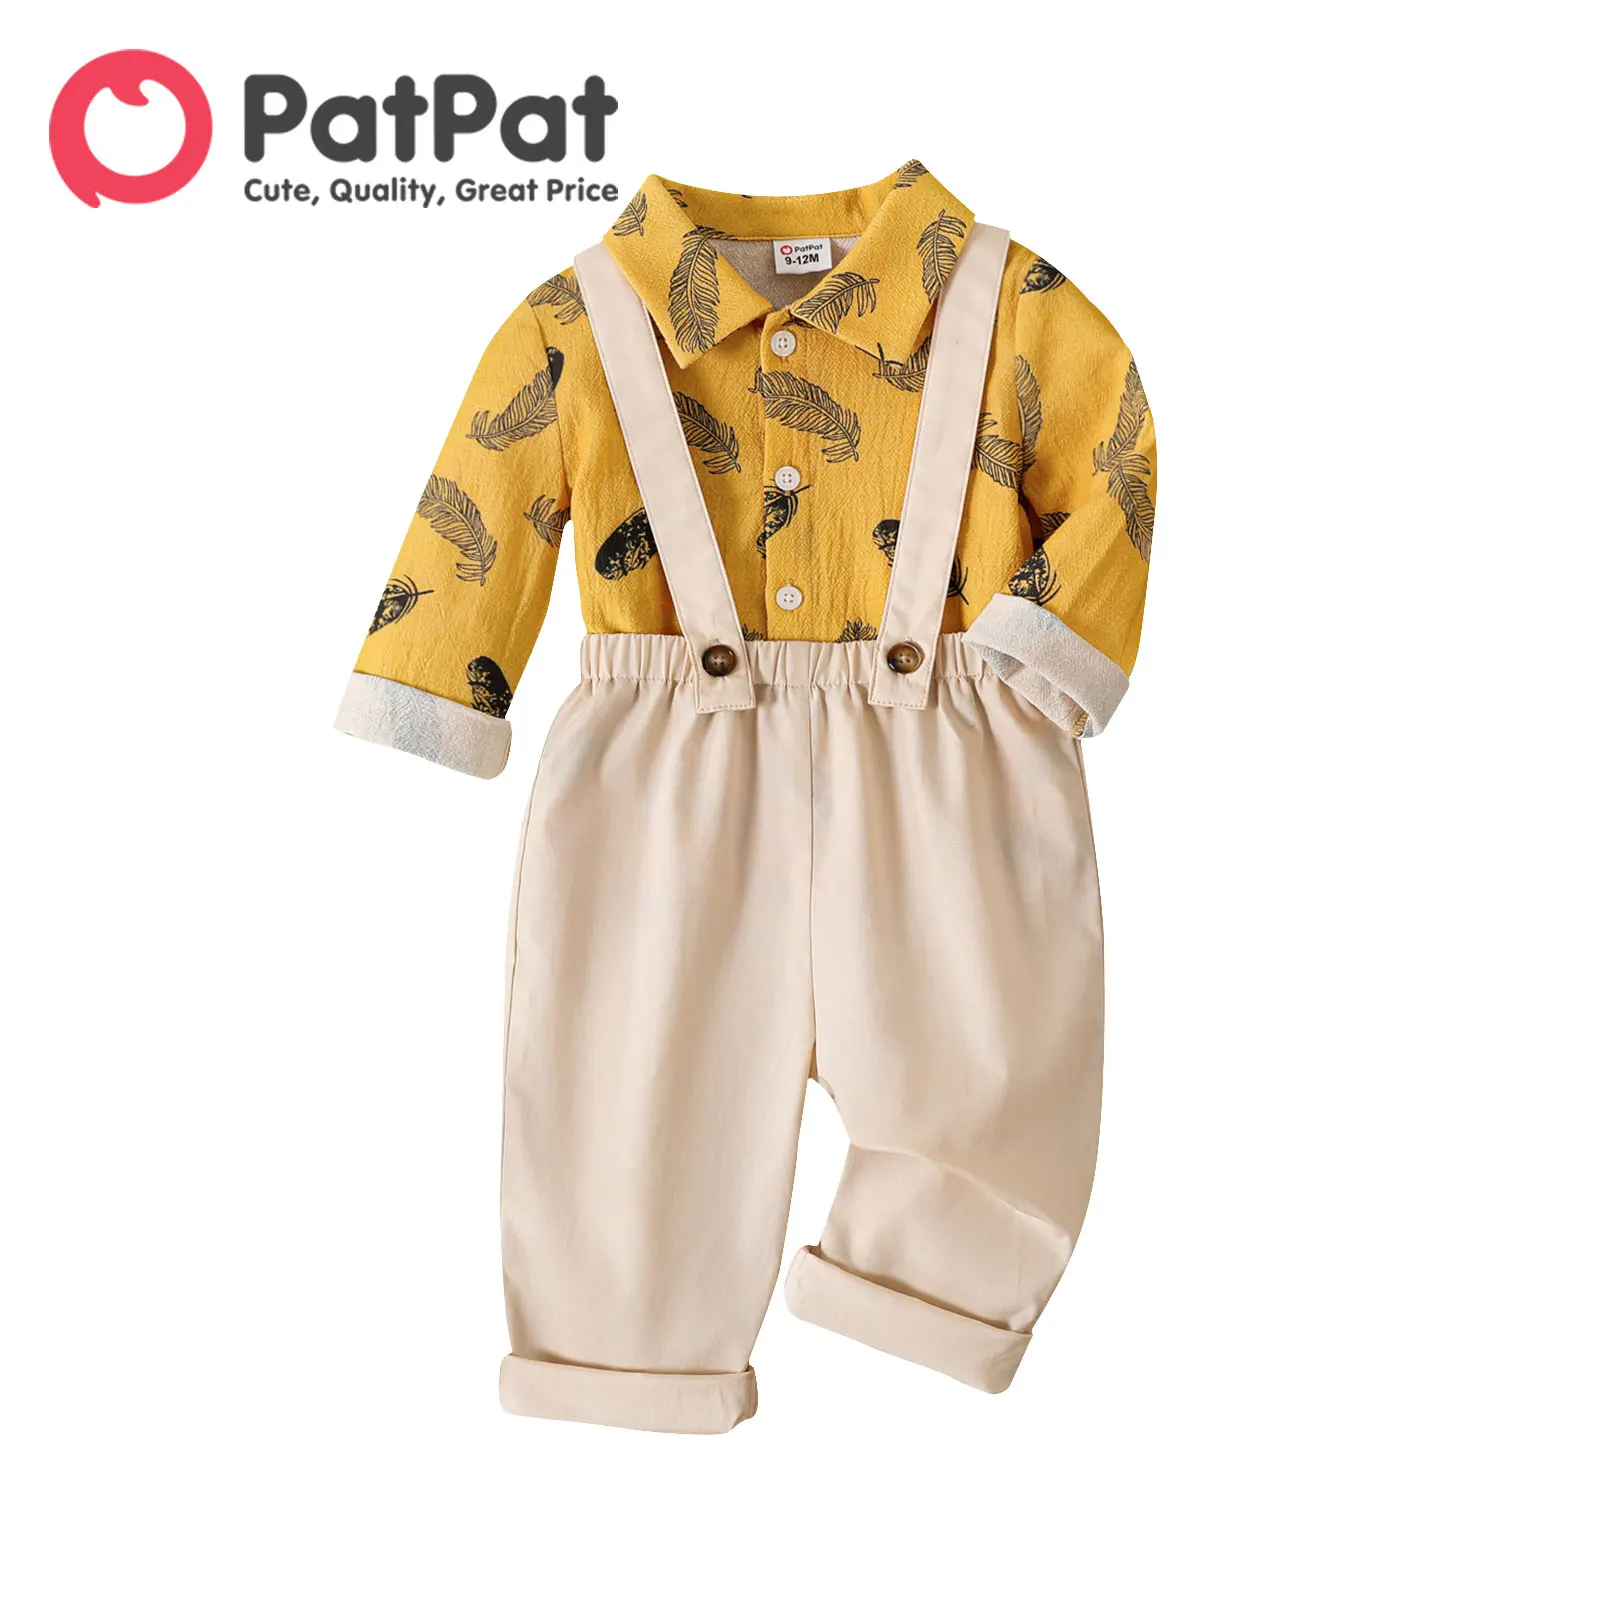 

PatPat 2pcs Baby Boy 100% Cotton Long-sleeve Allover Feather Print Button Up Shirt and Solid Suspender Pants Set